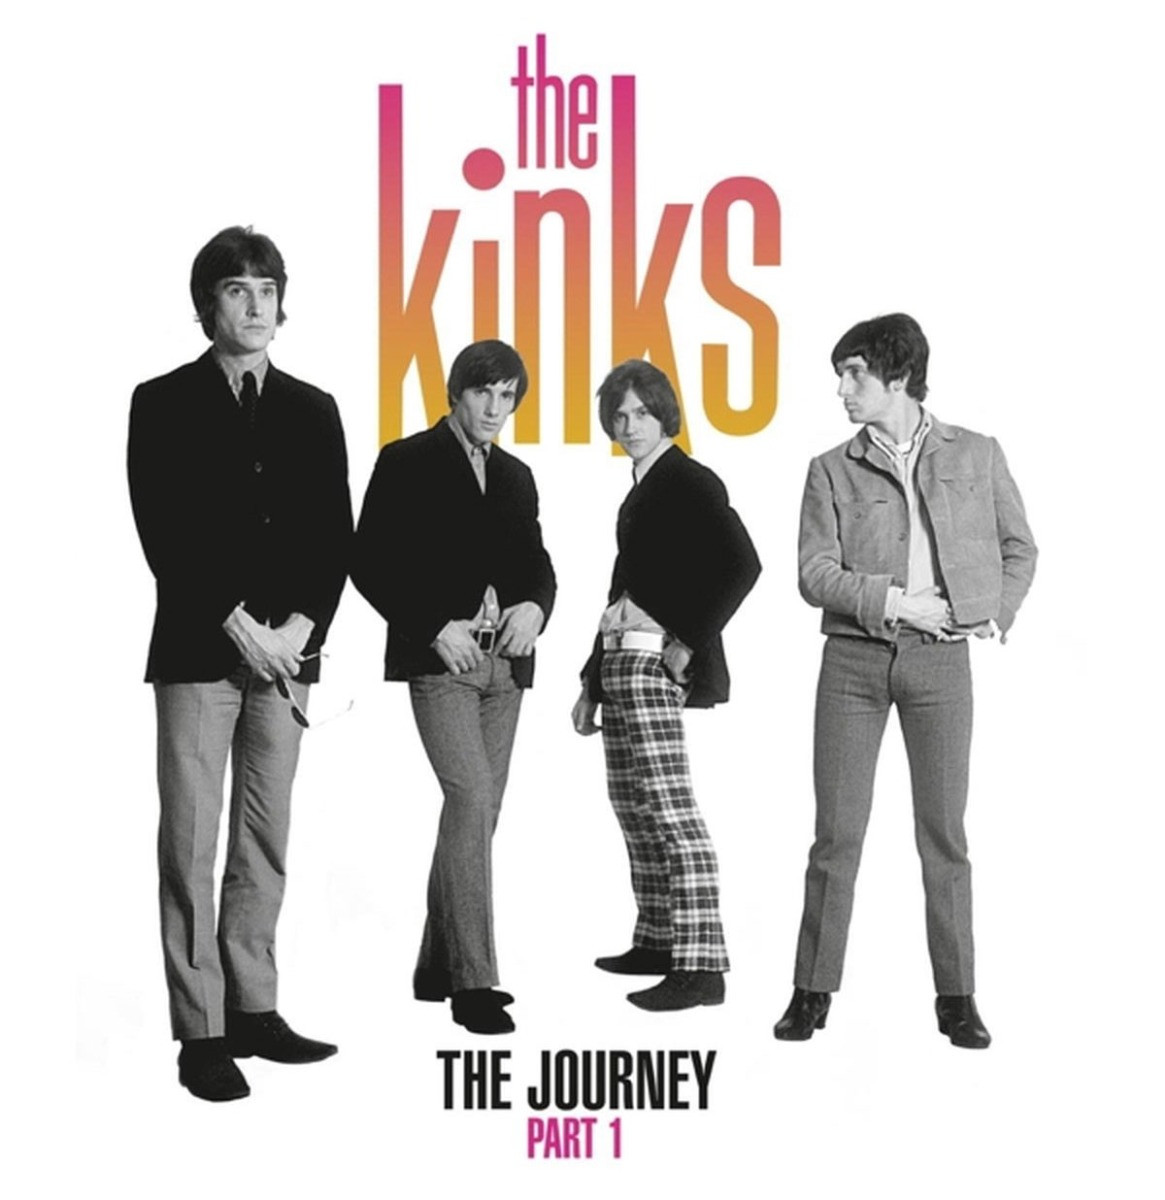 The Kinks - The Journey Part 1 - 2-LP